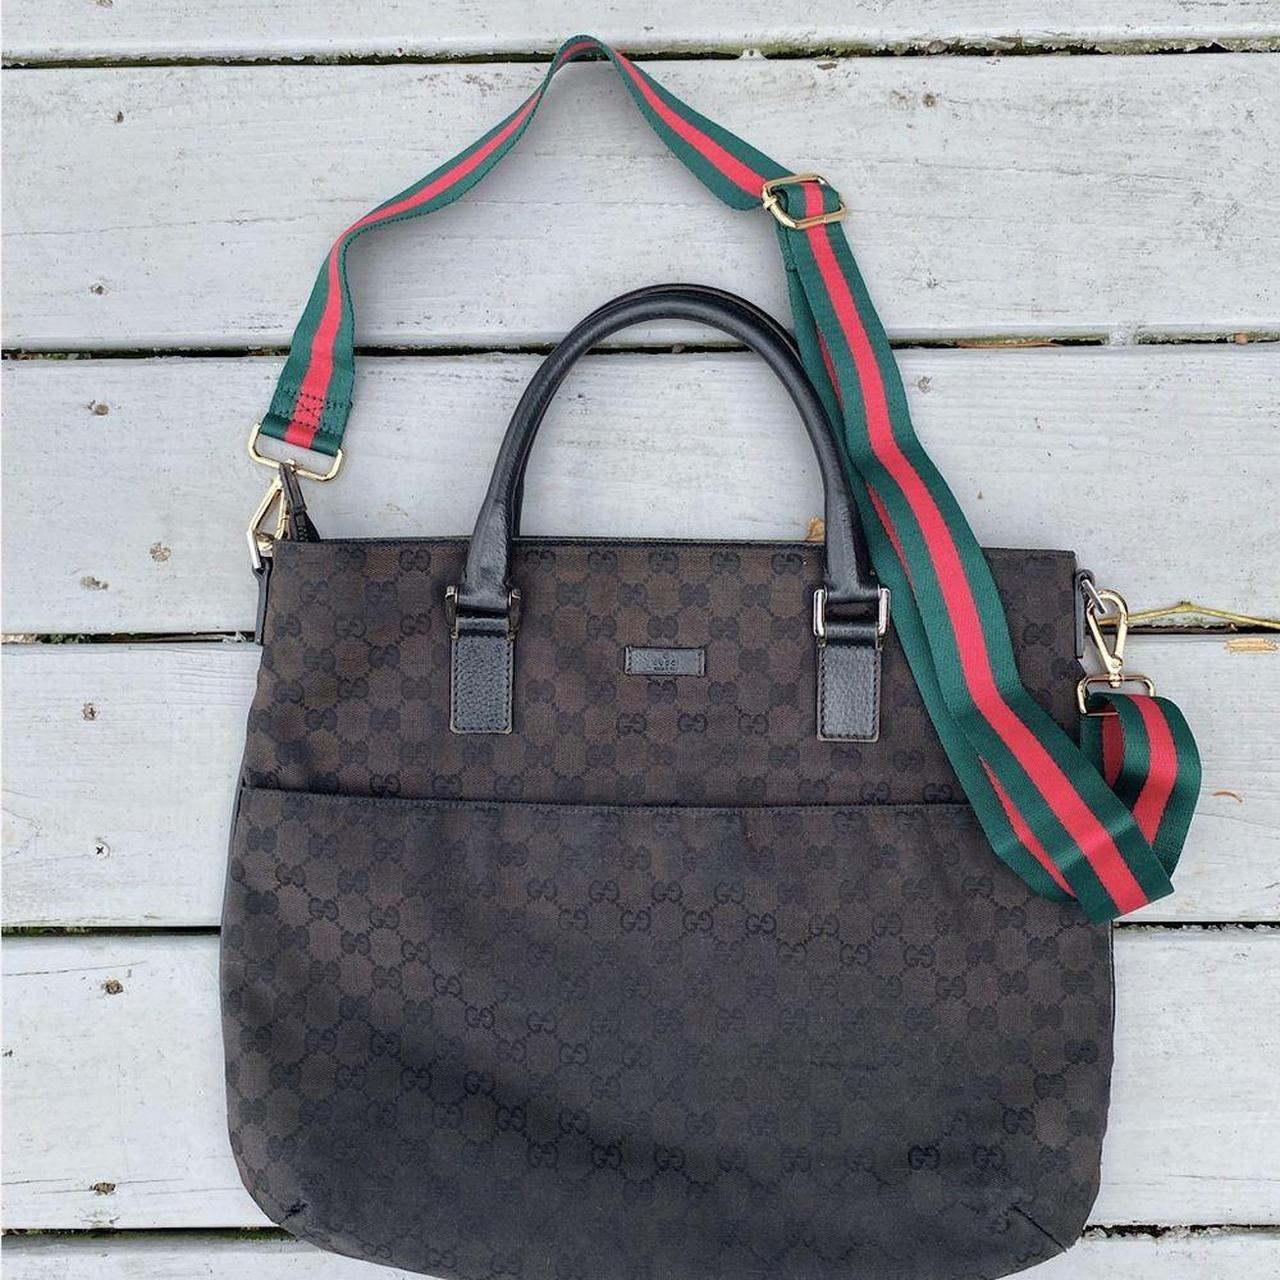 Gucci Women's Black and Grey Bag